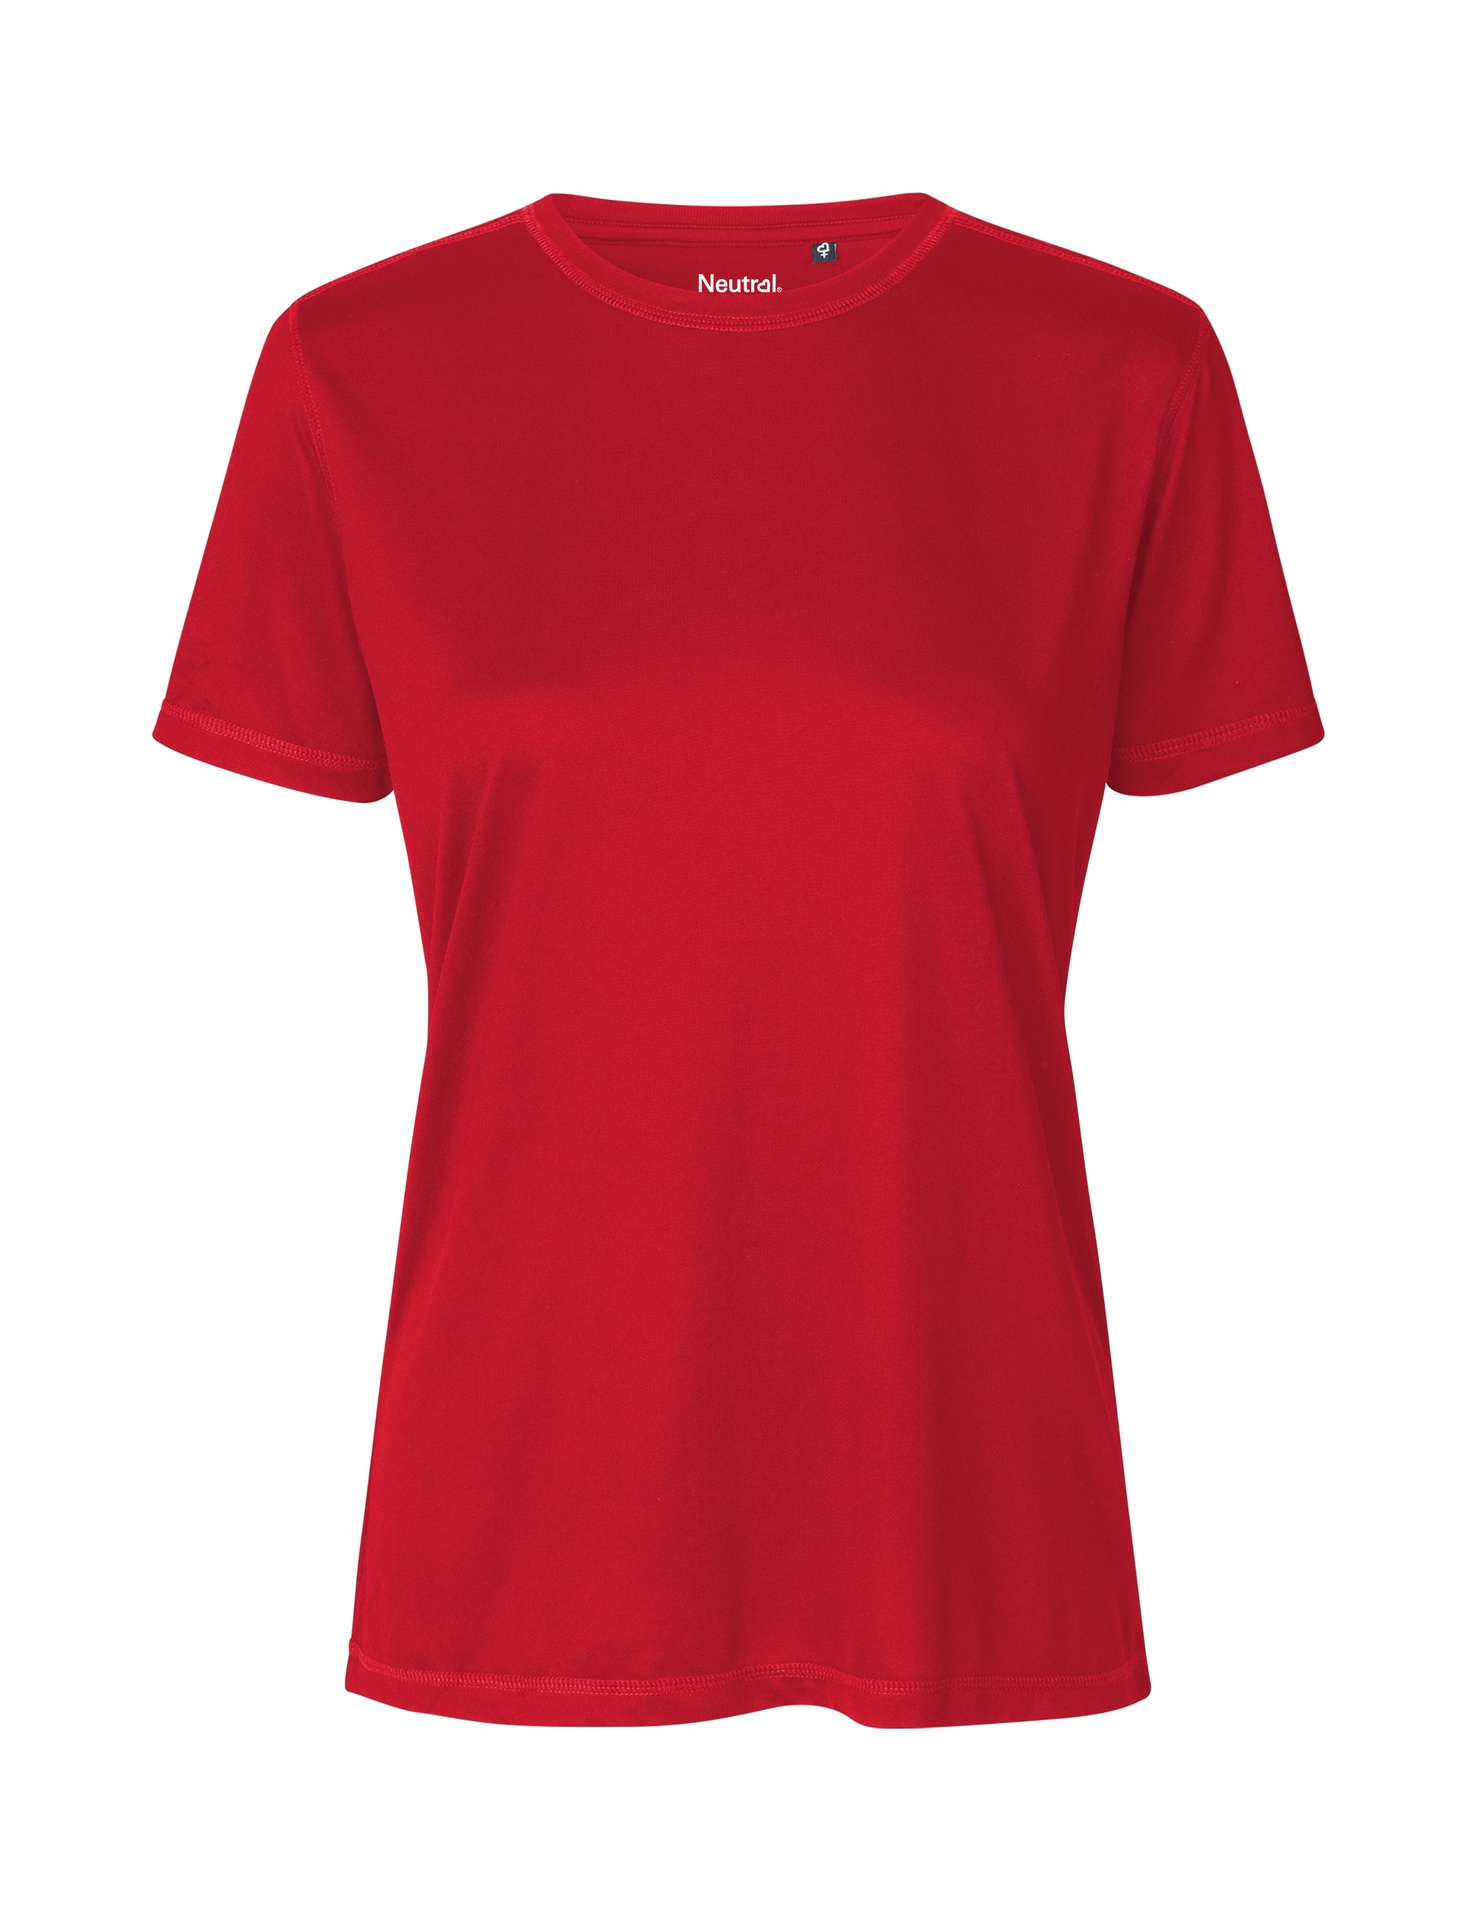 [PR/05212] Ladies Recycled Performance T-Shirt (Red 05, M)